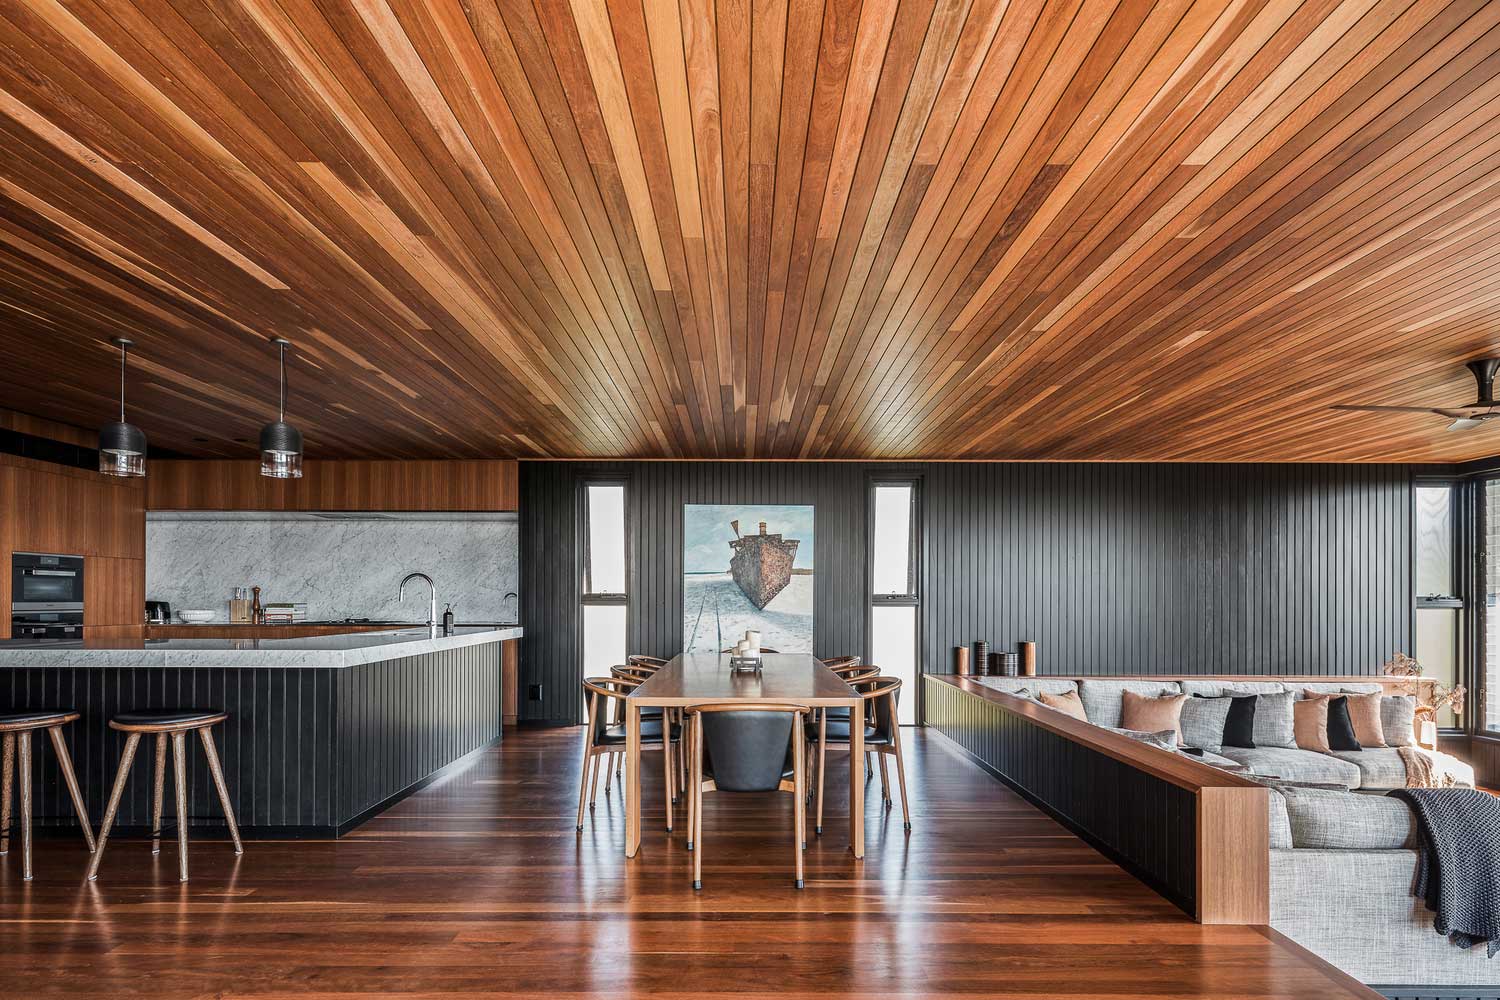 Wood finish ceiling as a modern trend